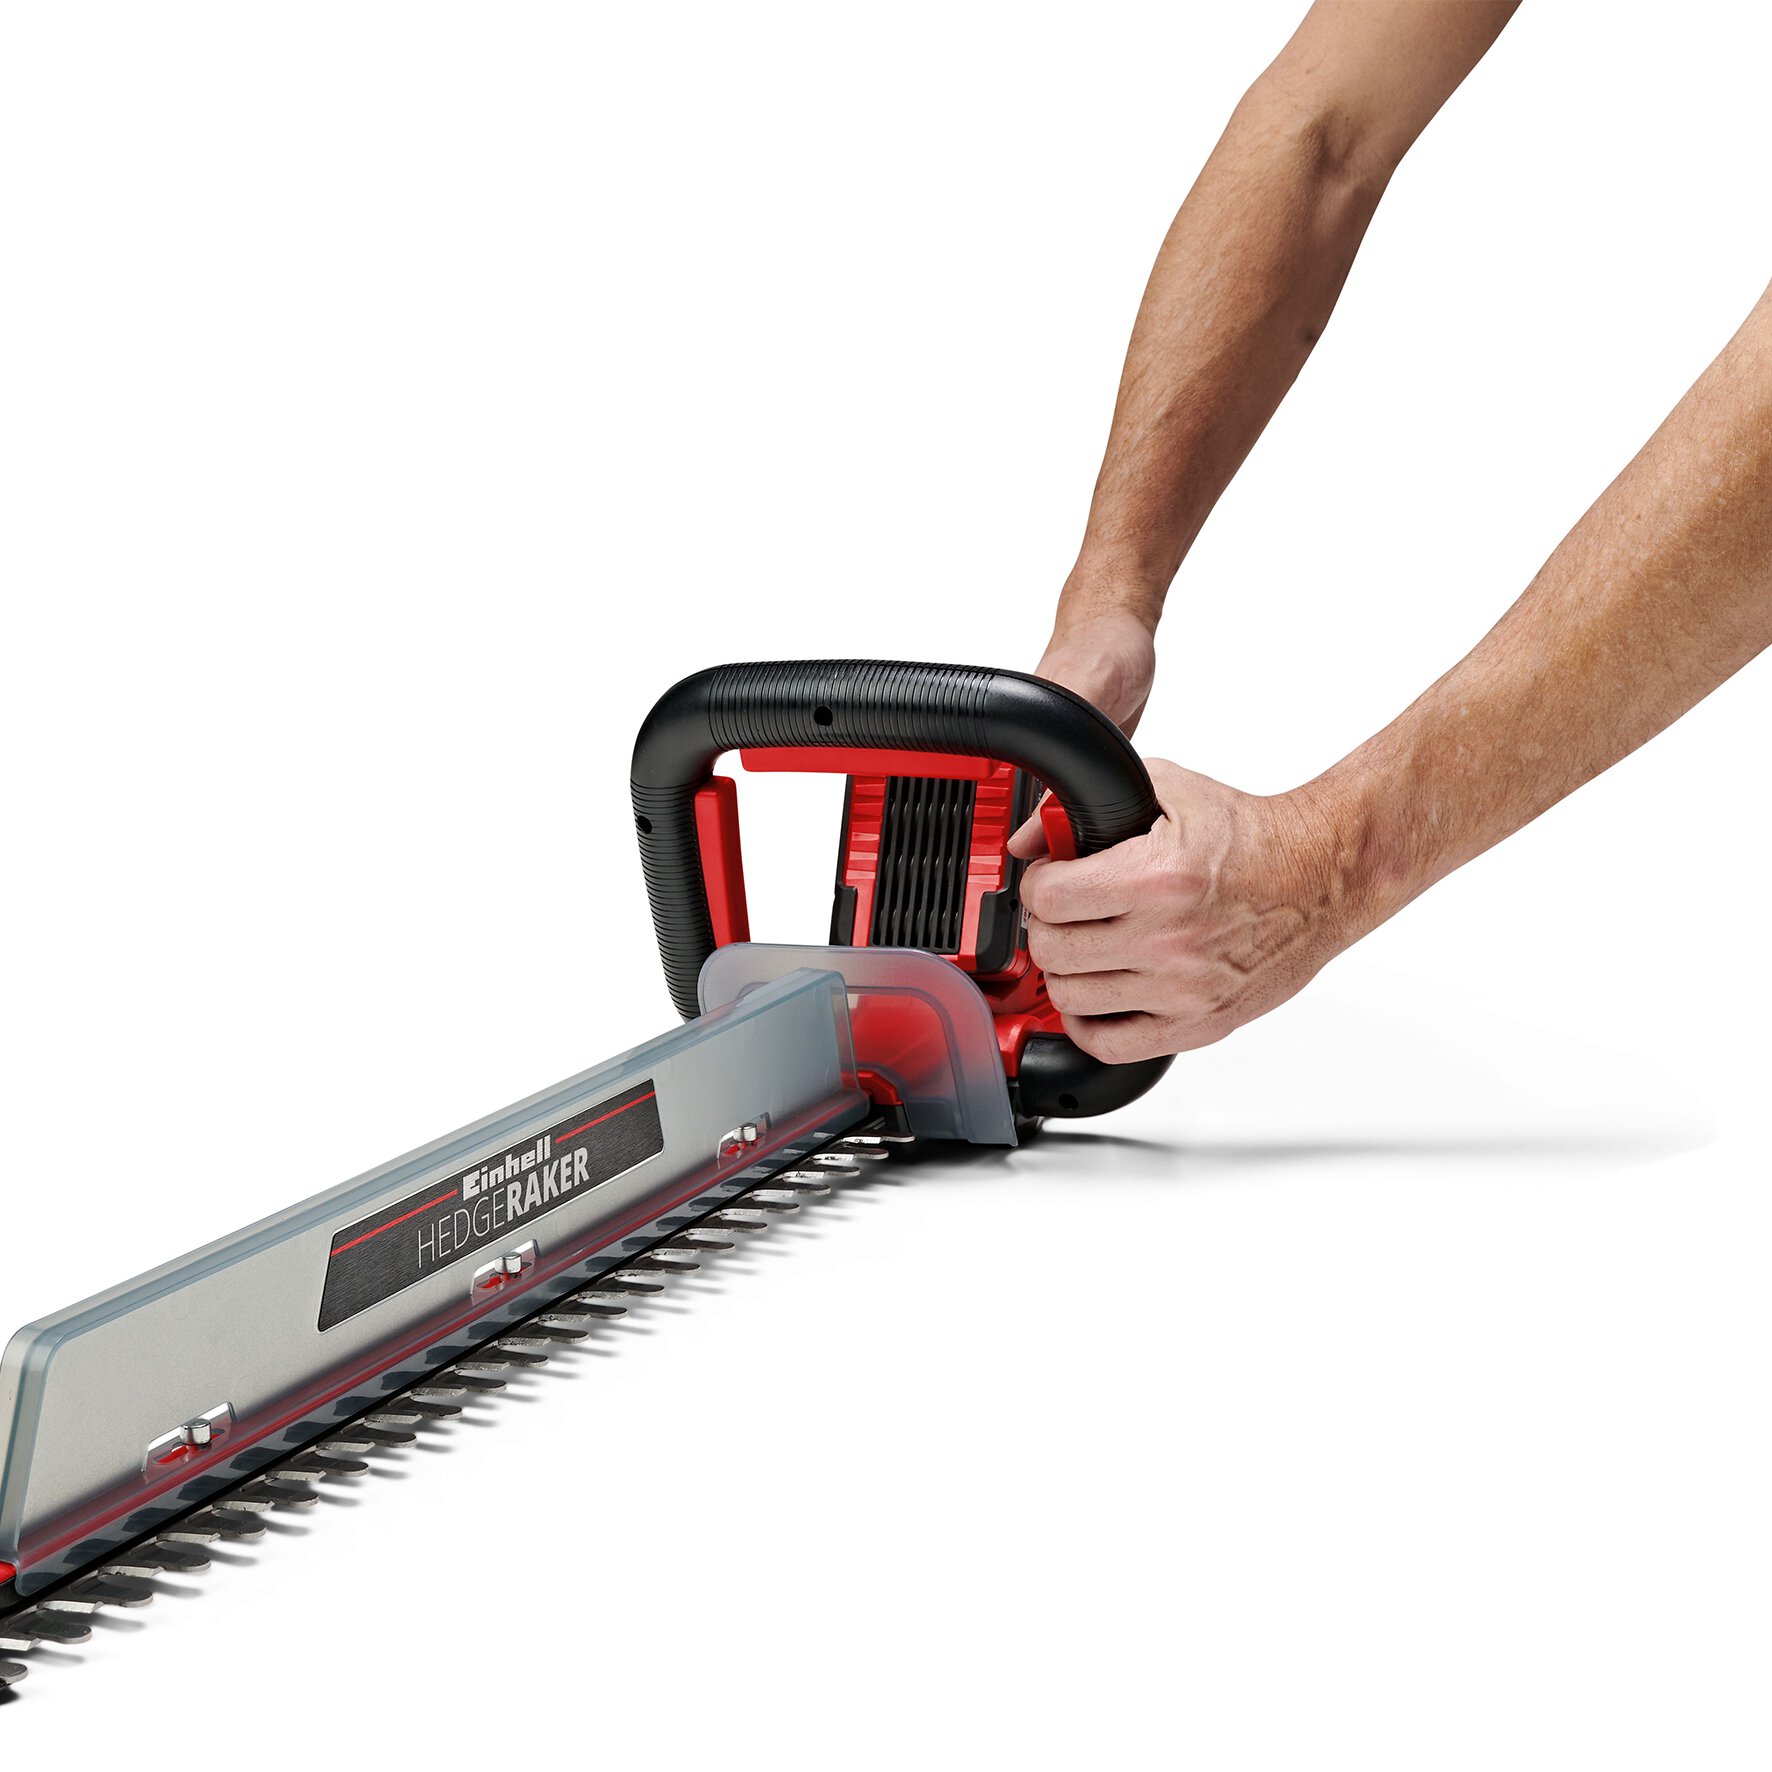 einhell-expert-cordless-hedge-trimmer-3410920-detail_image-003